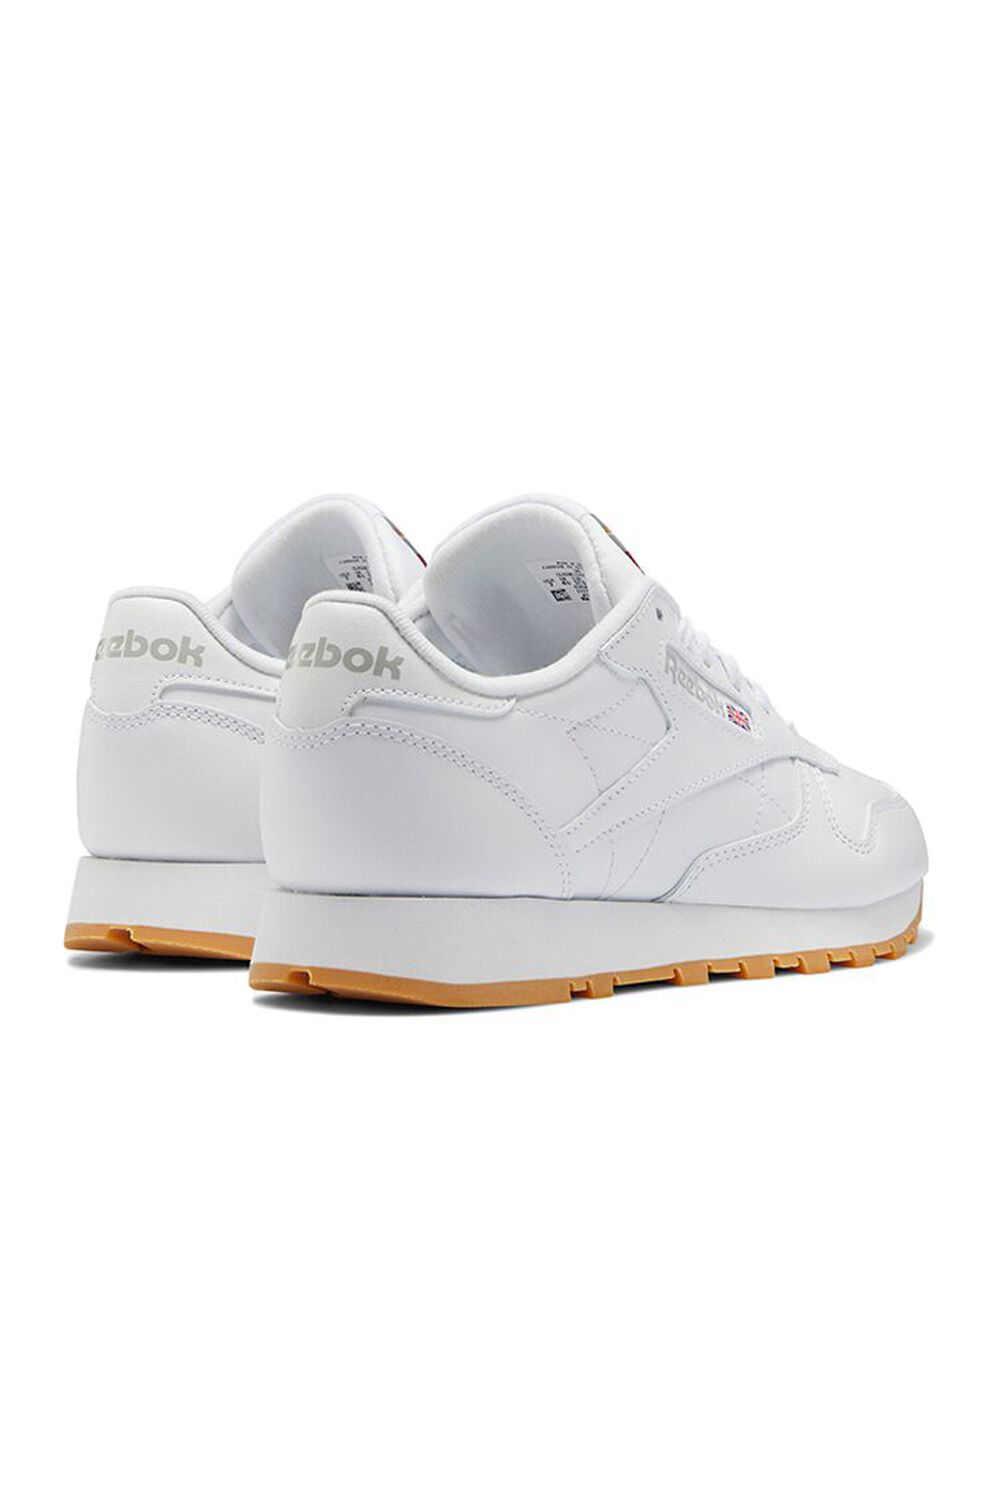 WHITE Reebok Classic Leather Shoes, image 3